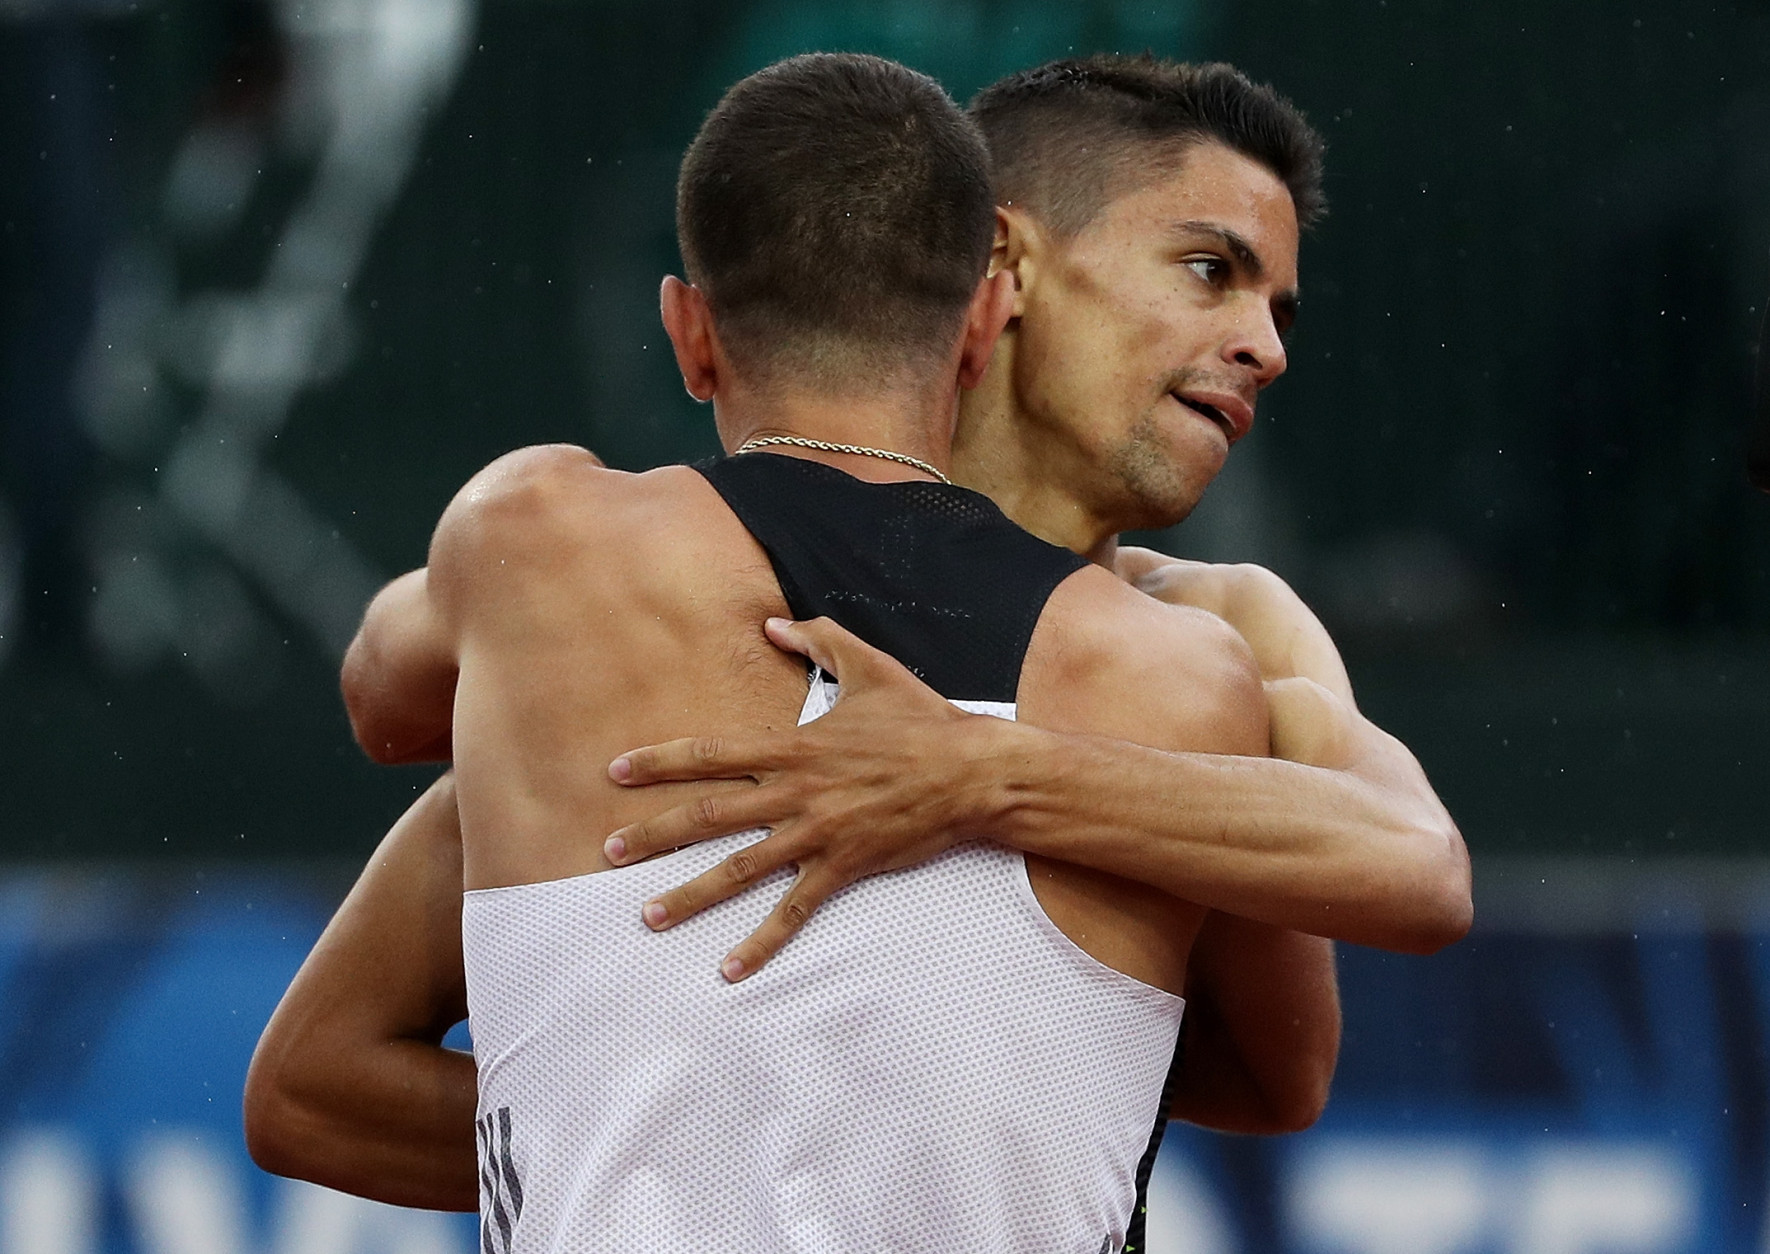 EUGENE, OR - JULY 10:  Matthew Centrowitz, first place, celebrates with Robby Andrews, second place, after the Men's 1500 Meter Final during the 2016 U.S. Olympic Track &amp; Field Team Trials at Hayward Field on July 10, 2016 in Eugene, Oregon.  (Photo by Patrick Smith/Getty Images)